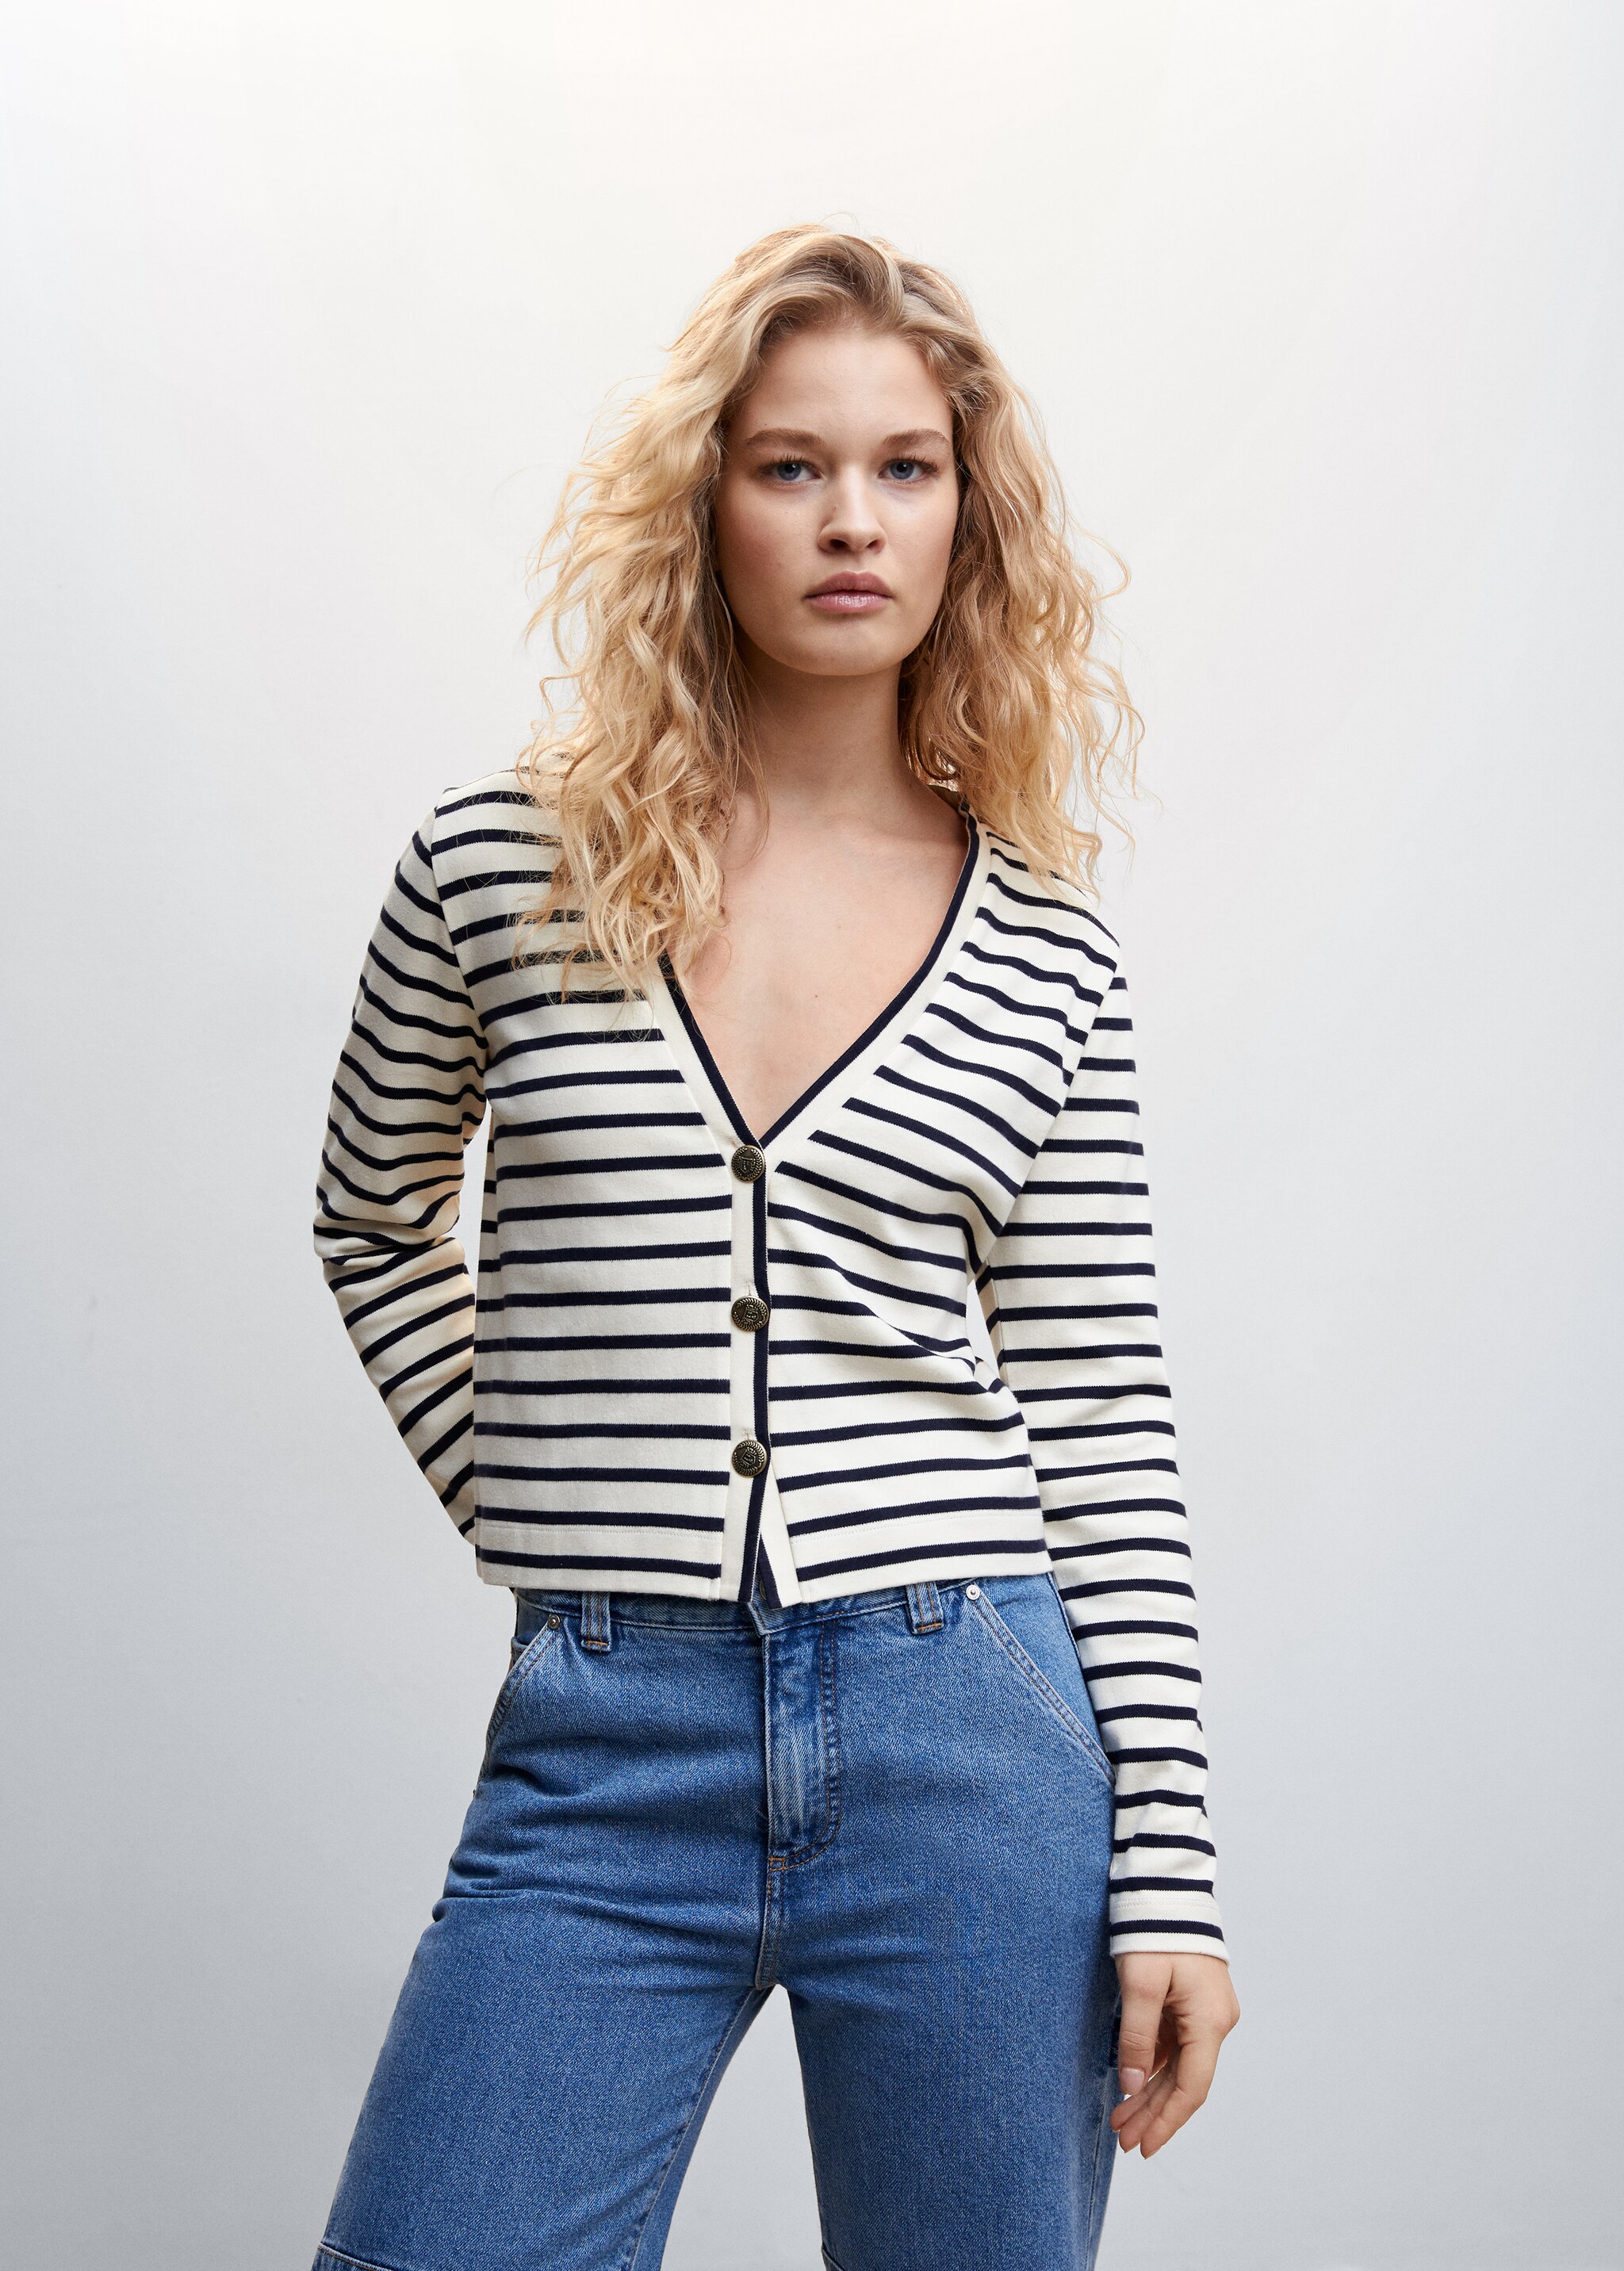 Striped cardigan with buttons - Medium plane